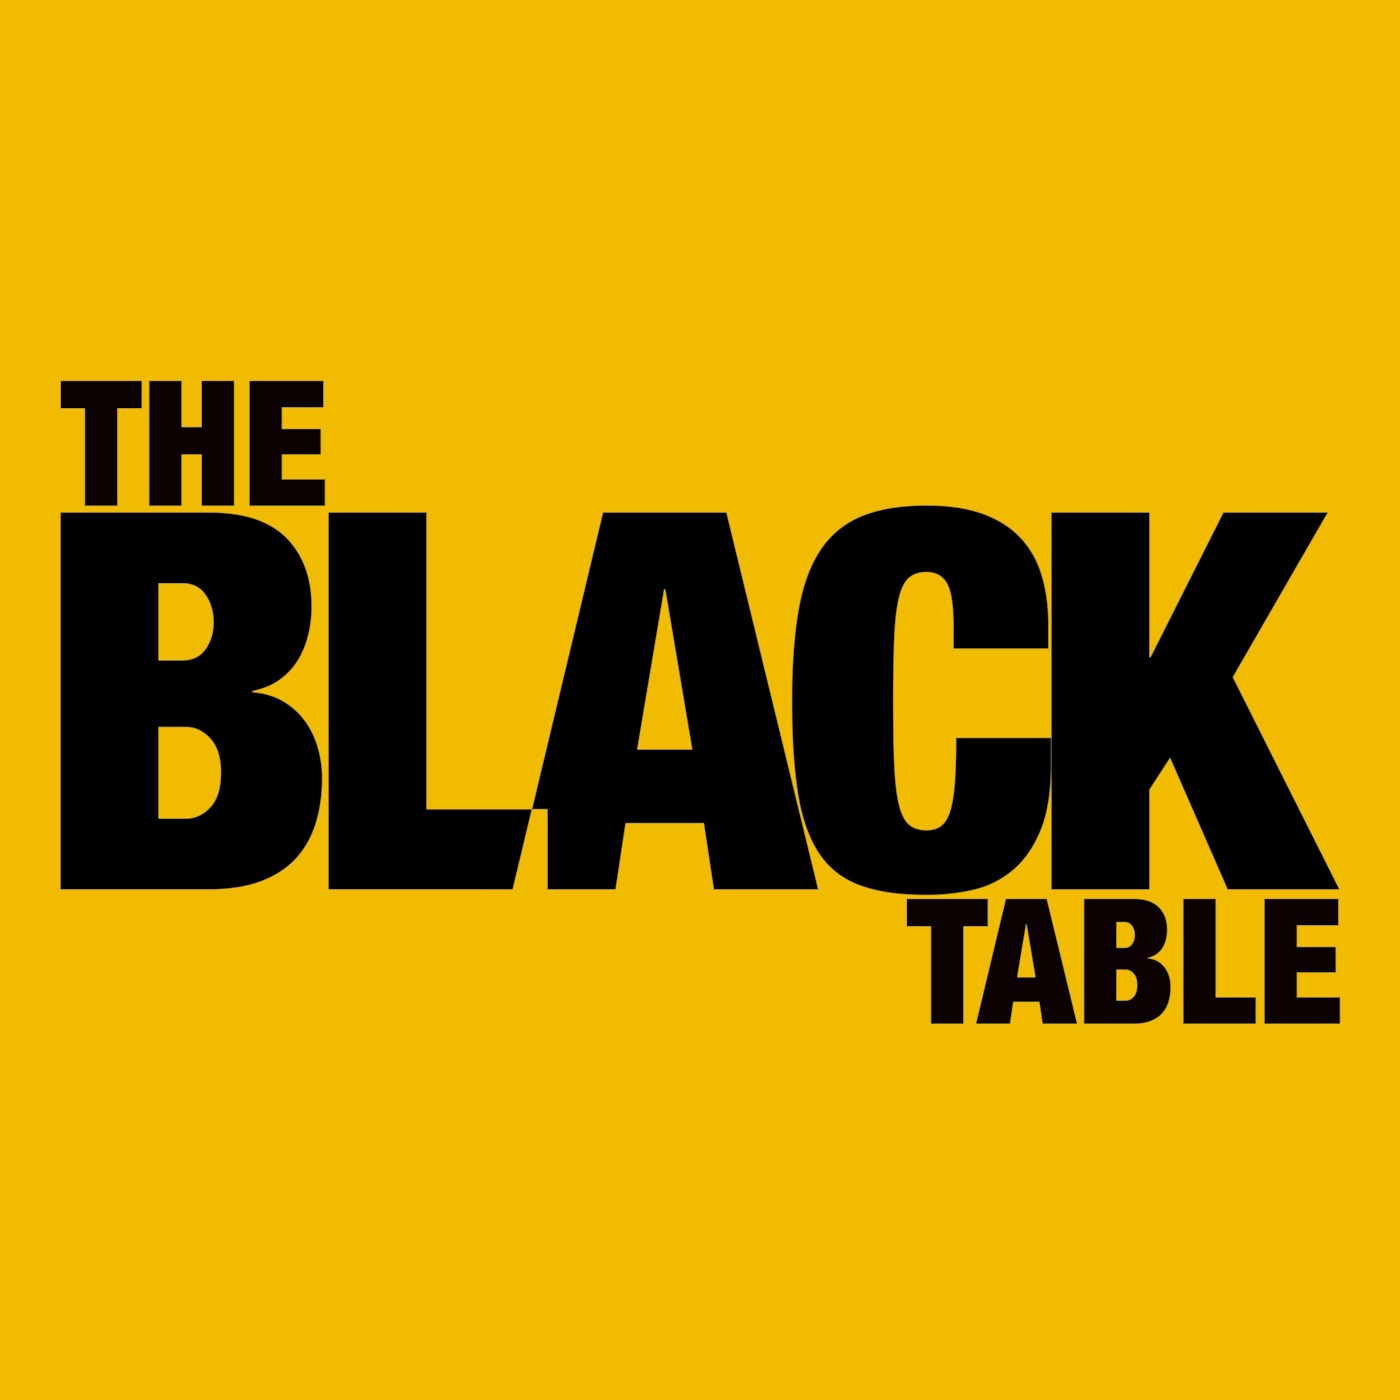 Ep. 19 | George Bush Doesn't Care About The Black Table